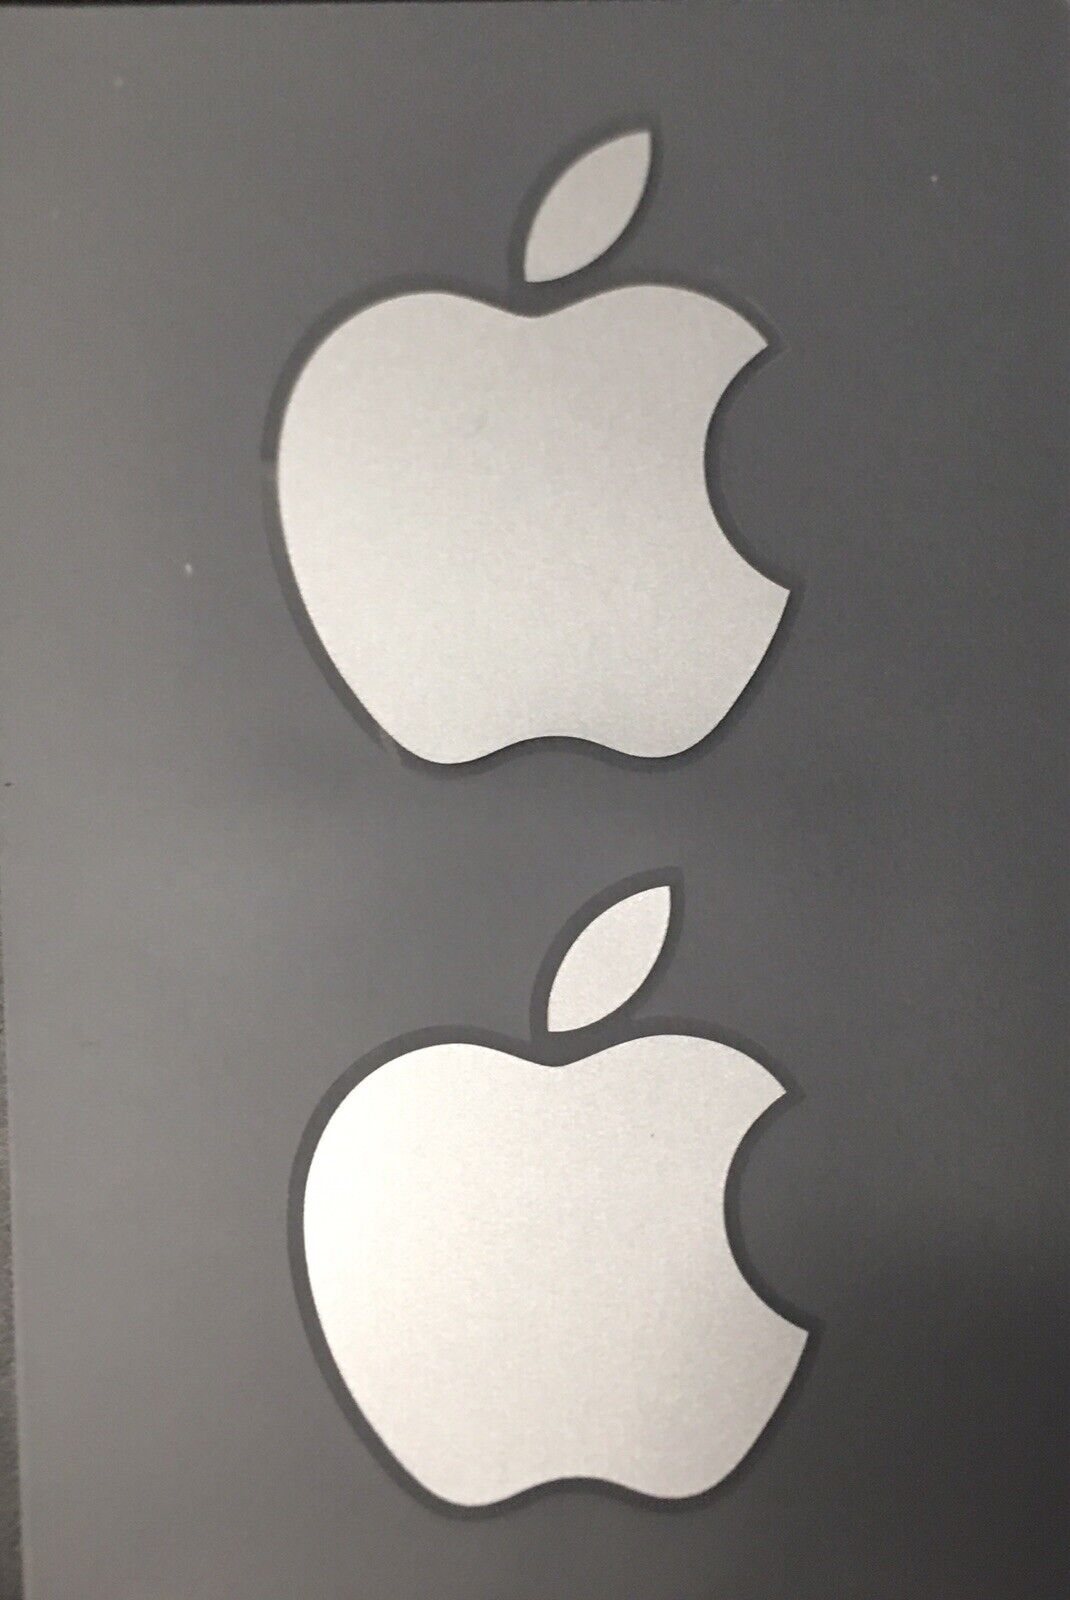 Apple Sticker Genuine New Logo 2 Total Stickers OEM Authentic Si